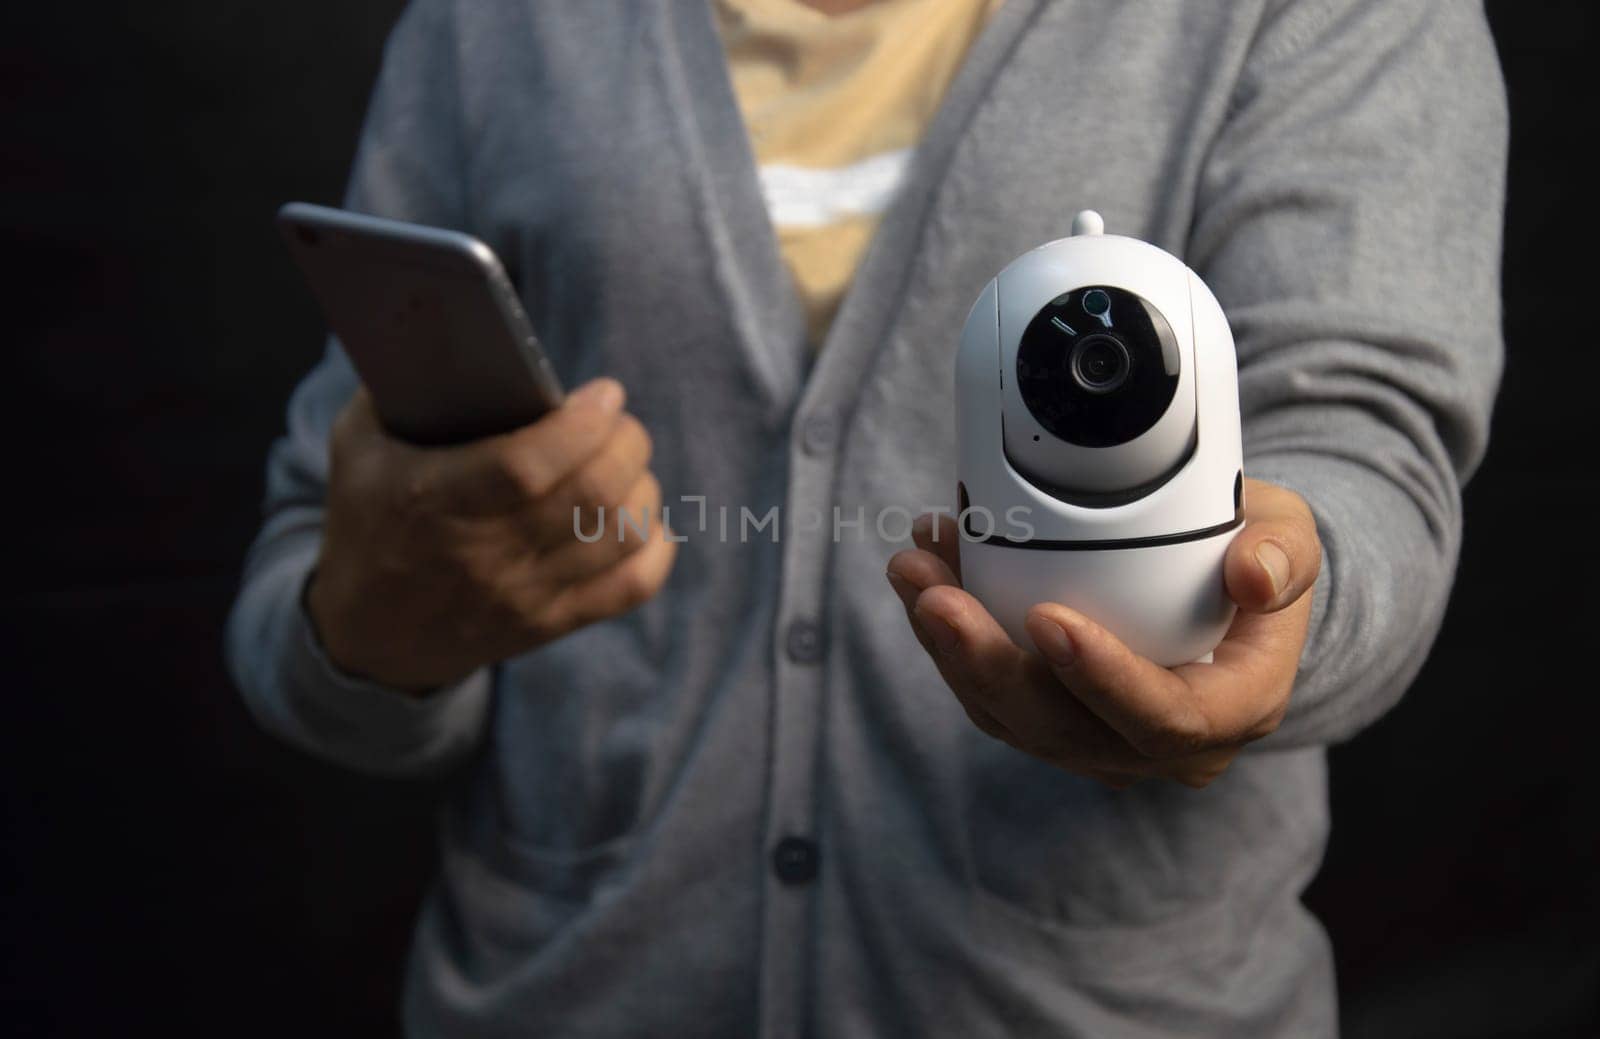 IP wifi wireless security camera supports Internet installation technology, security systems, smart home applications.	